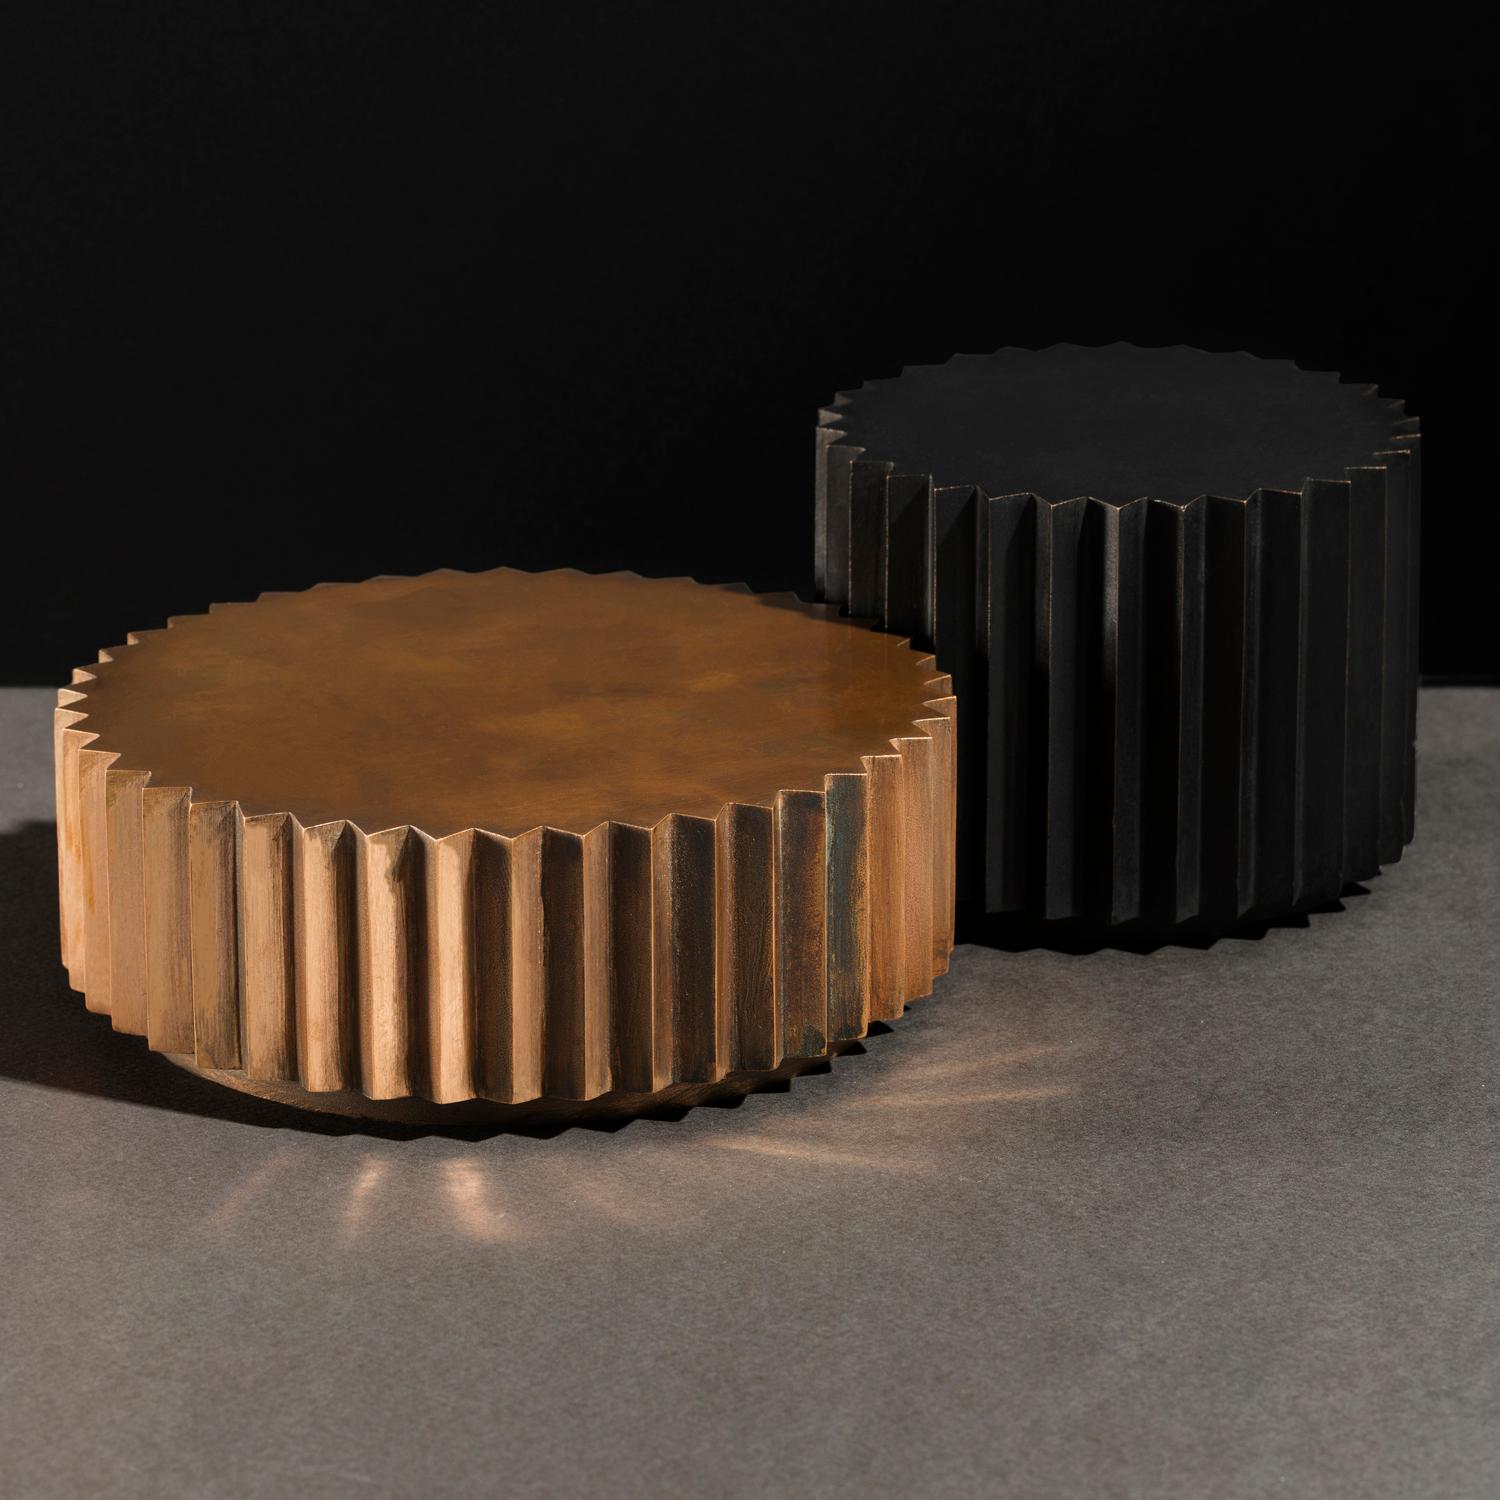 Set Of 2 Doris Bronze Coffee Tables by Fred and Juul
Dimensions: Low Coffee Table: Ø 84 x H 30 cm.
Coffee Table: Ø 60 x H 42 cm.
Materials: Bronze.

Available in bronze and aluminum. Also available in different measurements. Custom sizes, materials